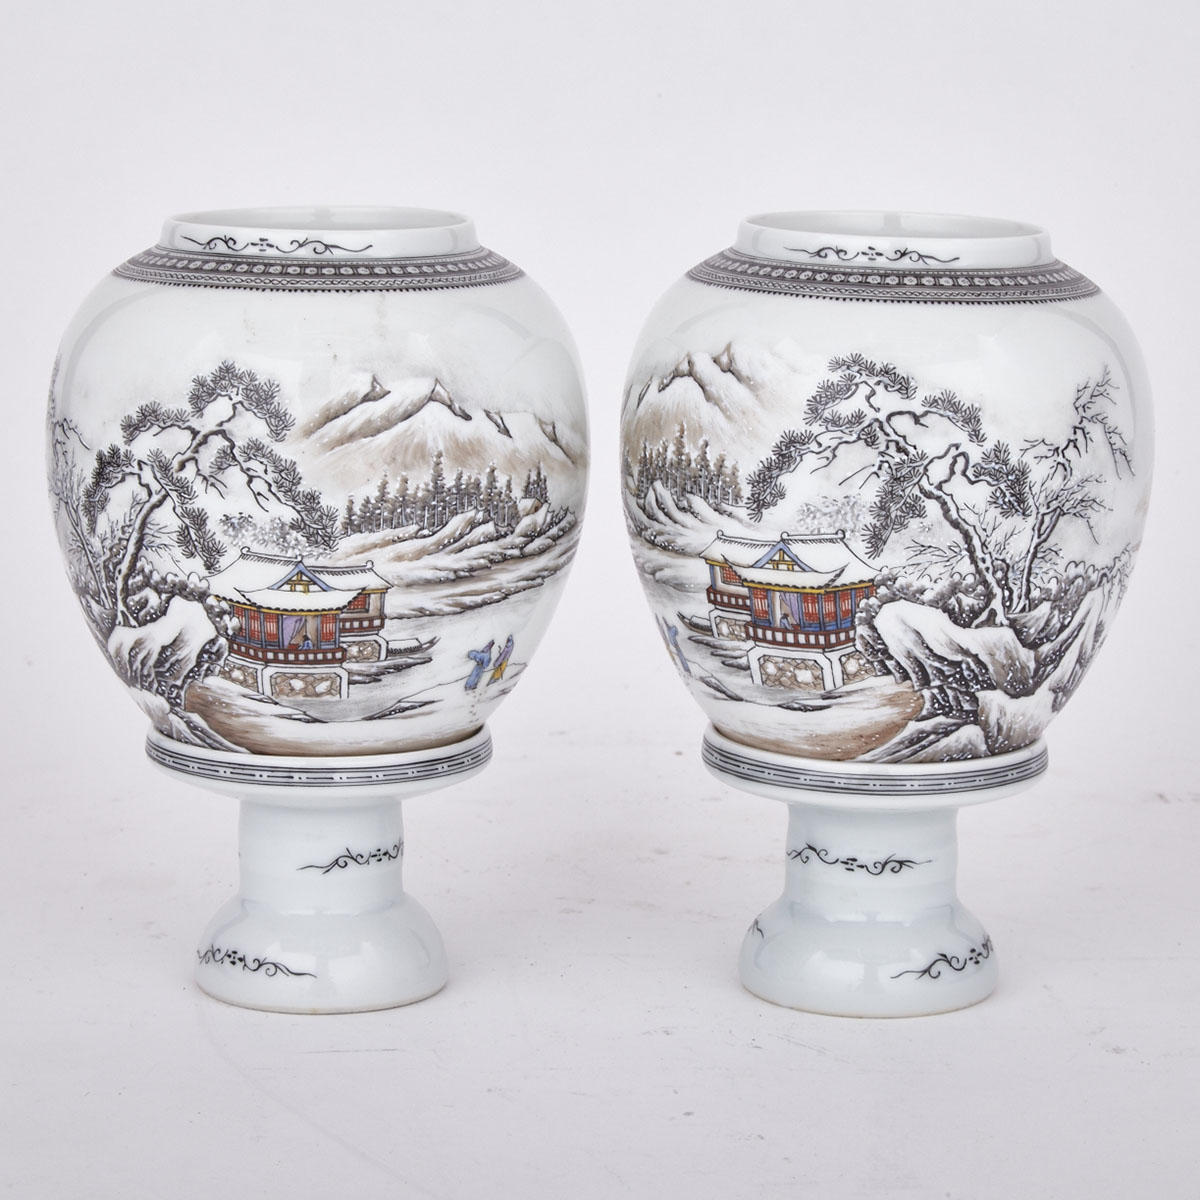 Pair of Famille Rose Candle Shades and Stands, Mid-20th Century